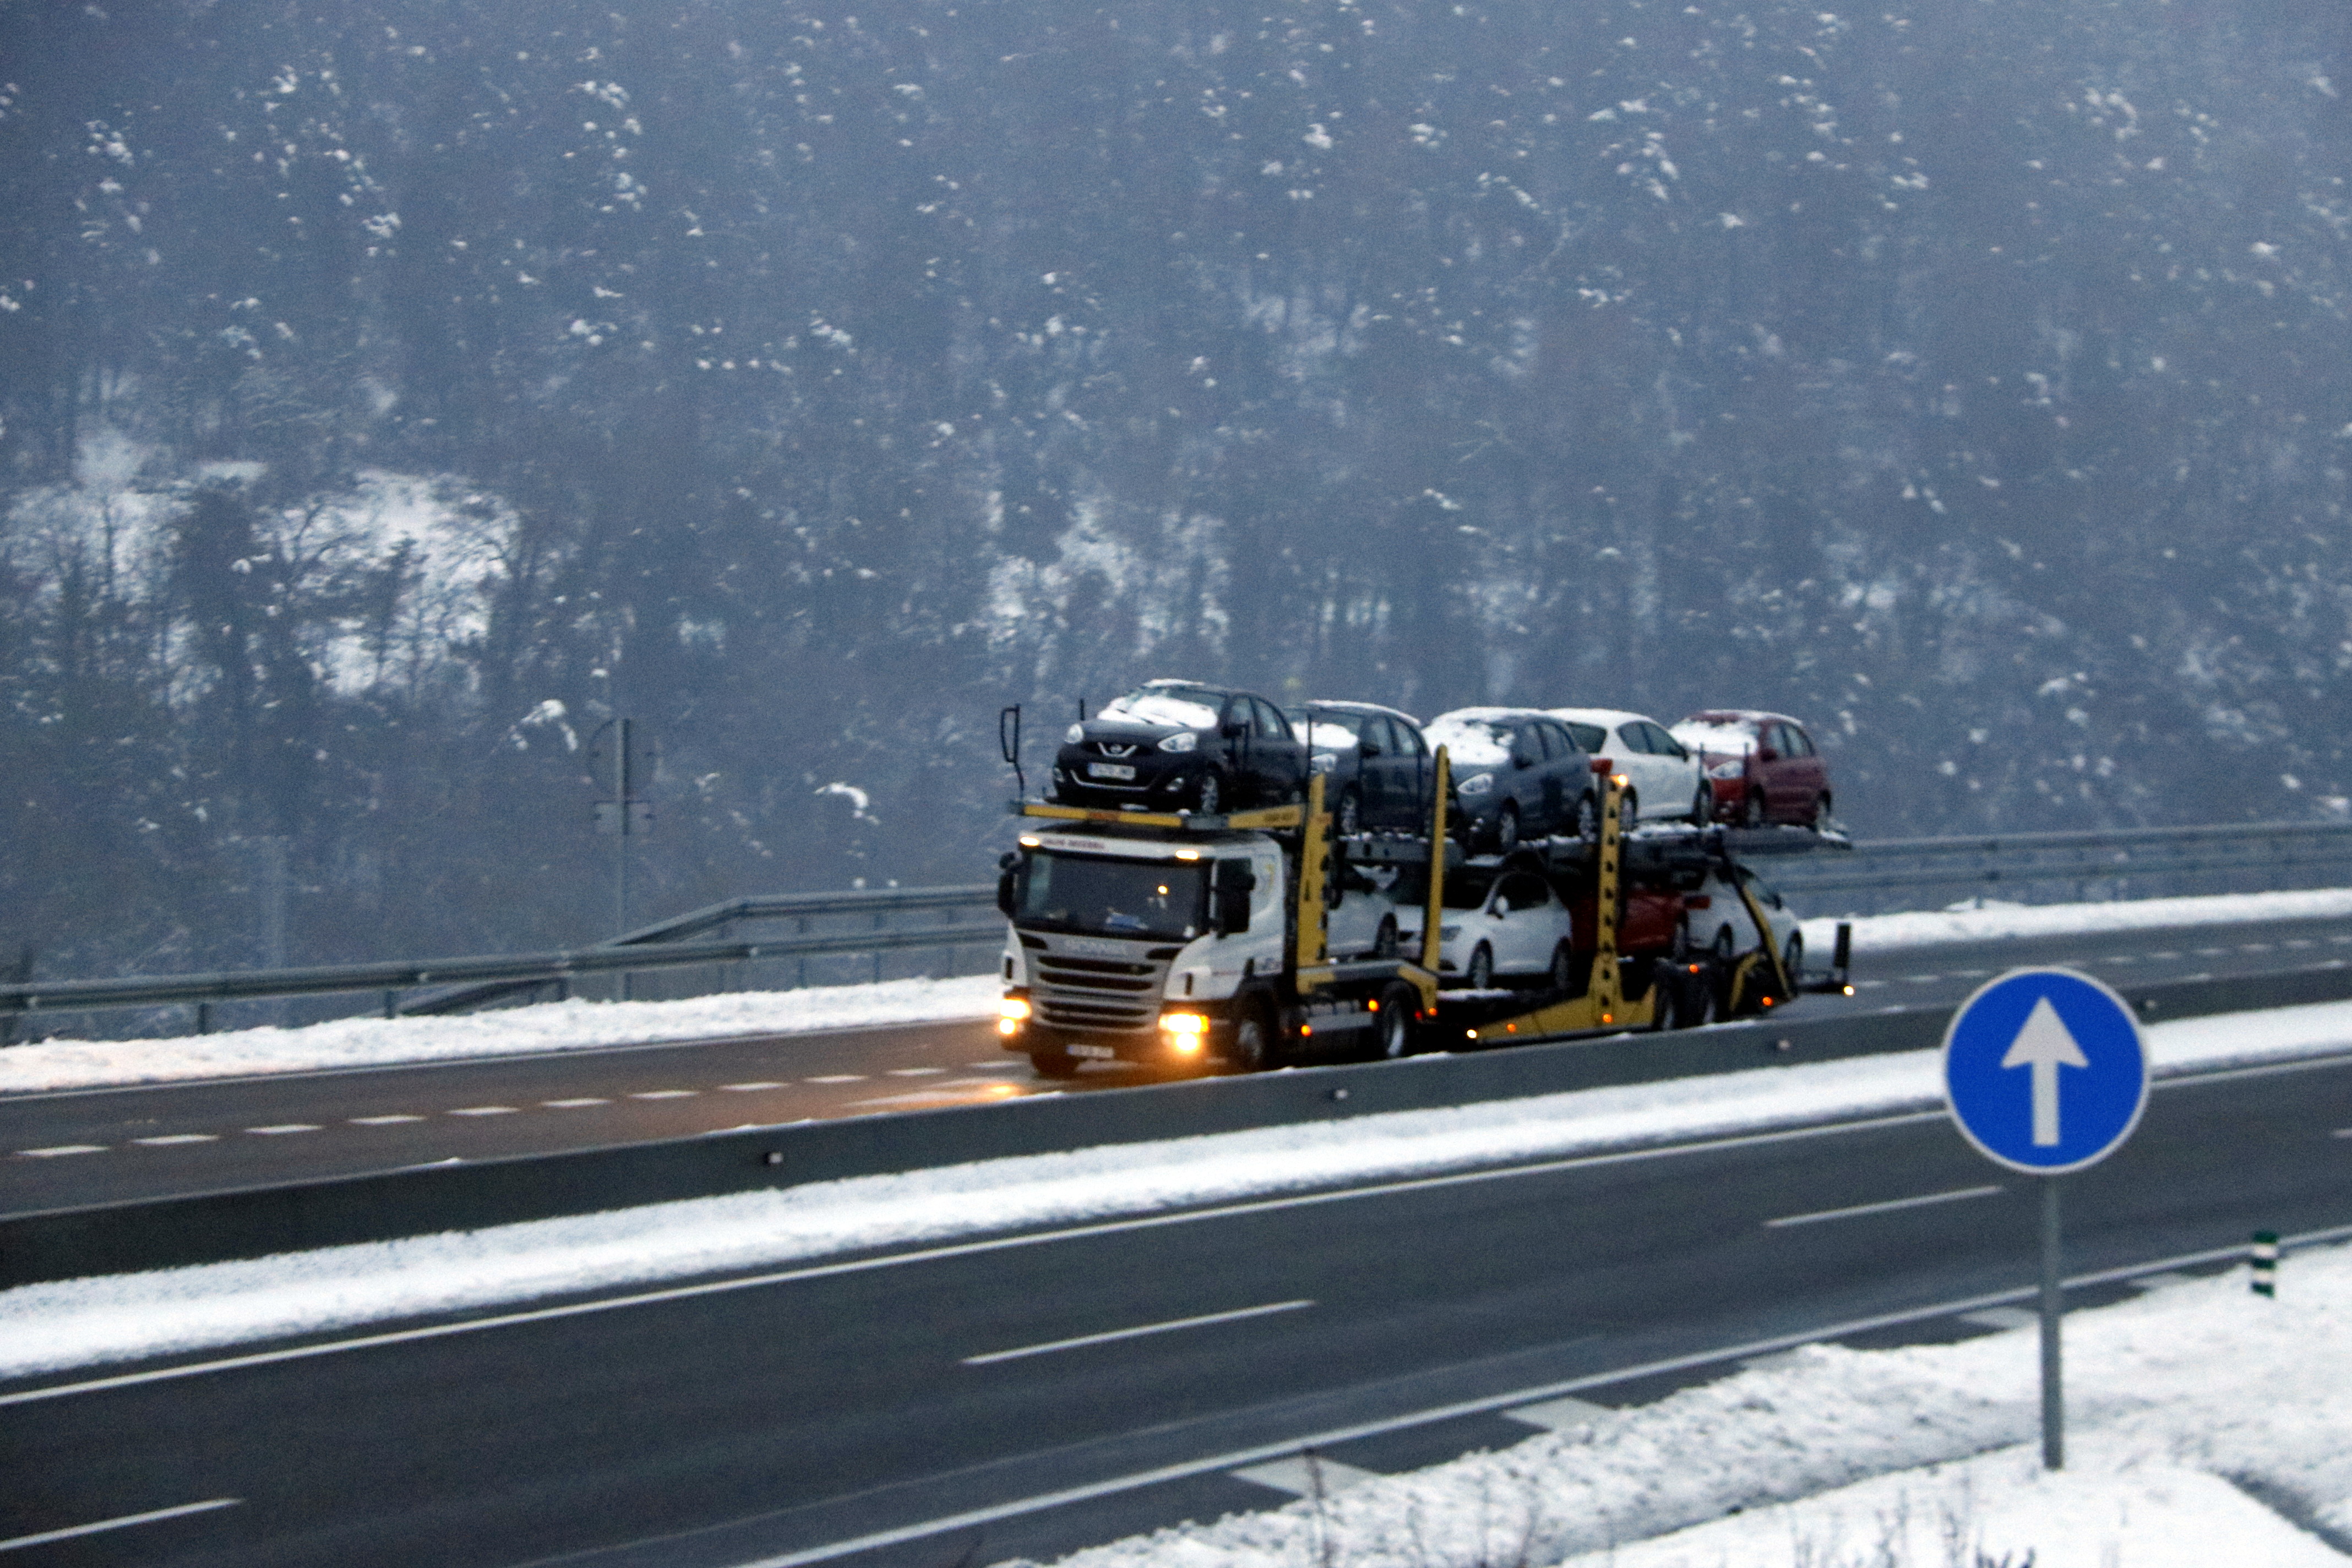 Snow falls while a lorry transports cars on the highway on February 28 2018 (by Laura Busquets)